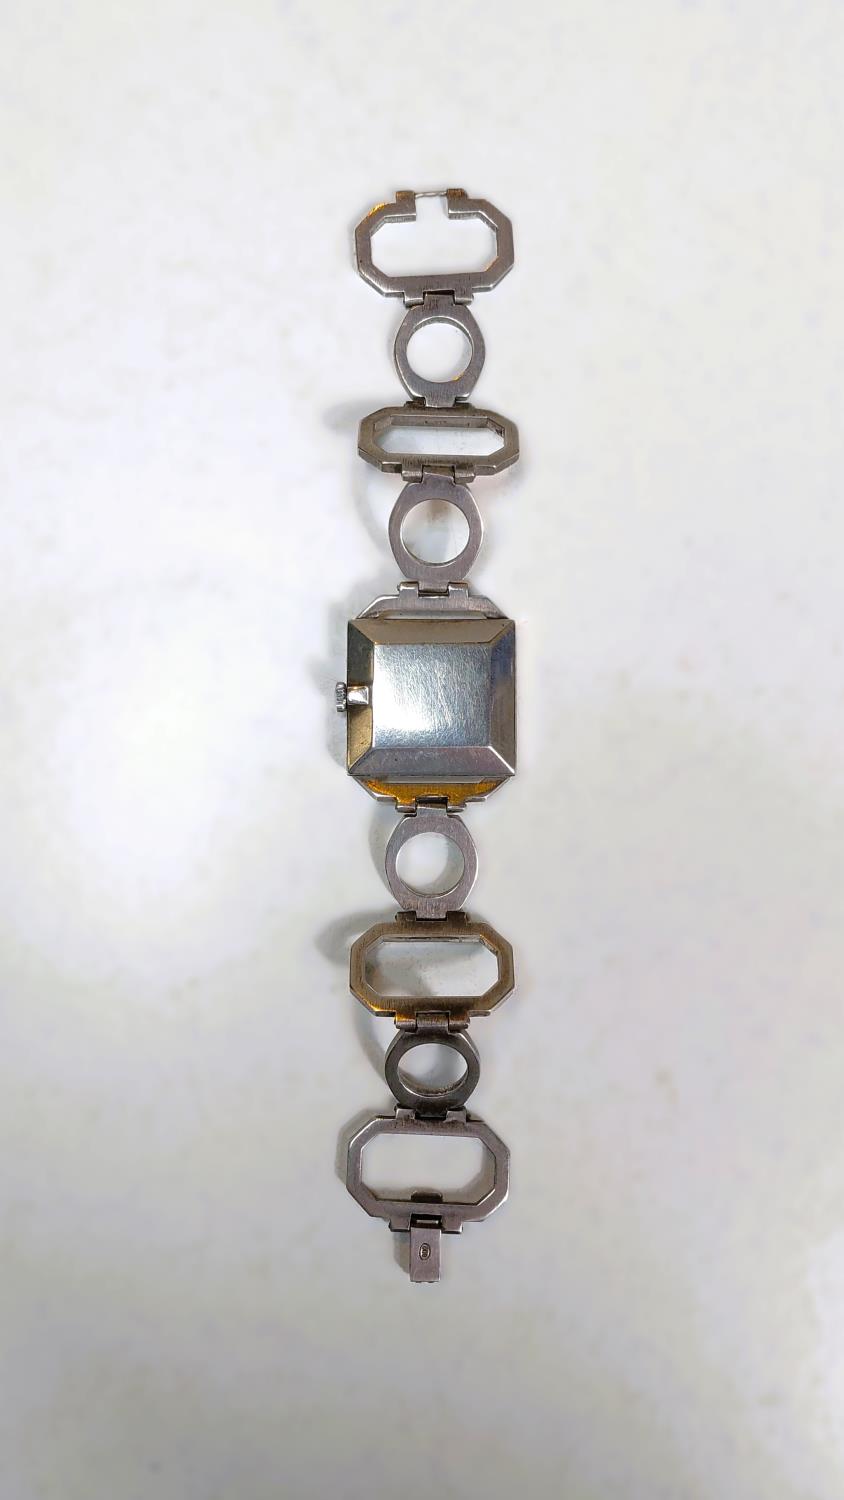 A 1970 Fisher Extra white metal watch in the manor of Roy King, loop bracelet - Image 3 of 6